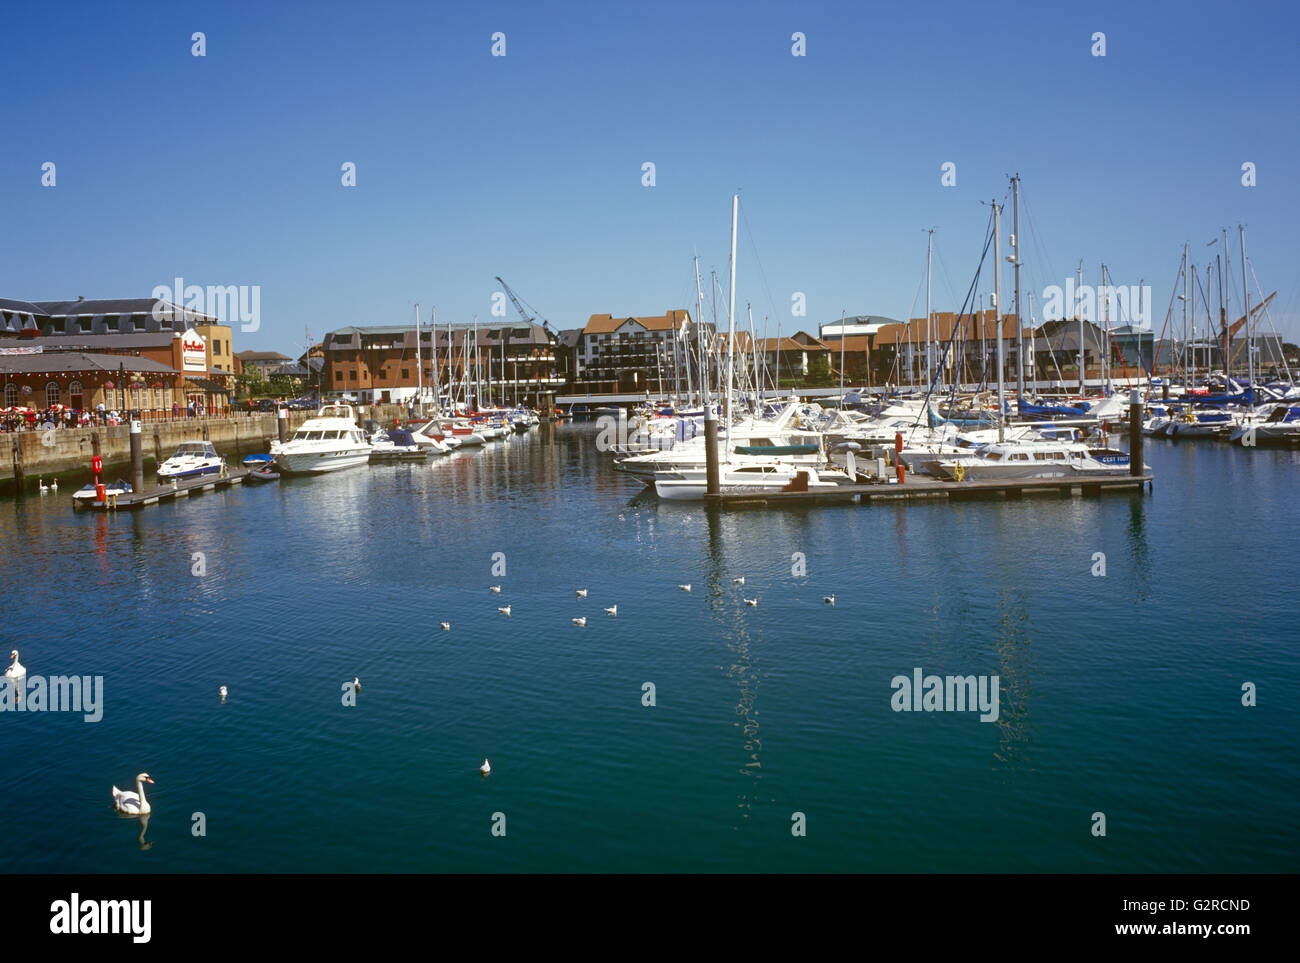 Docked ships on the water, outside Stock Photo